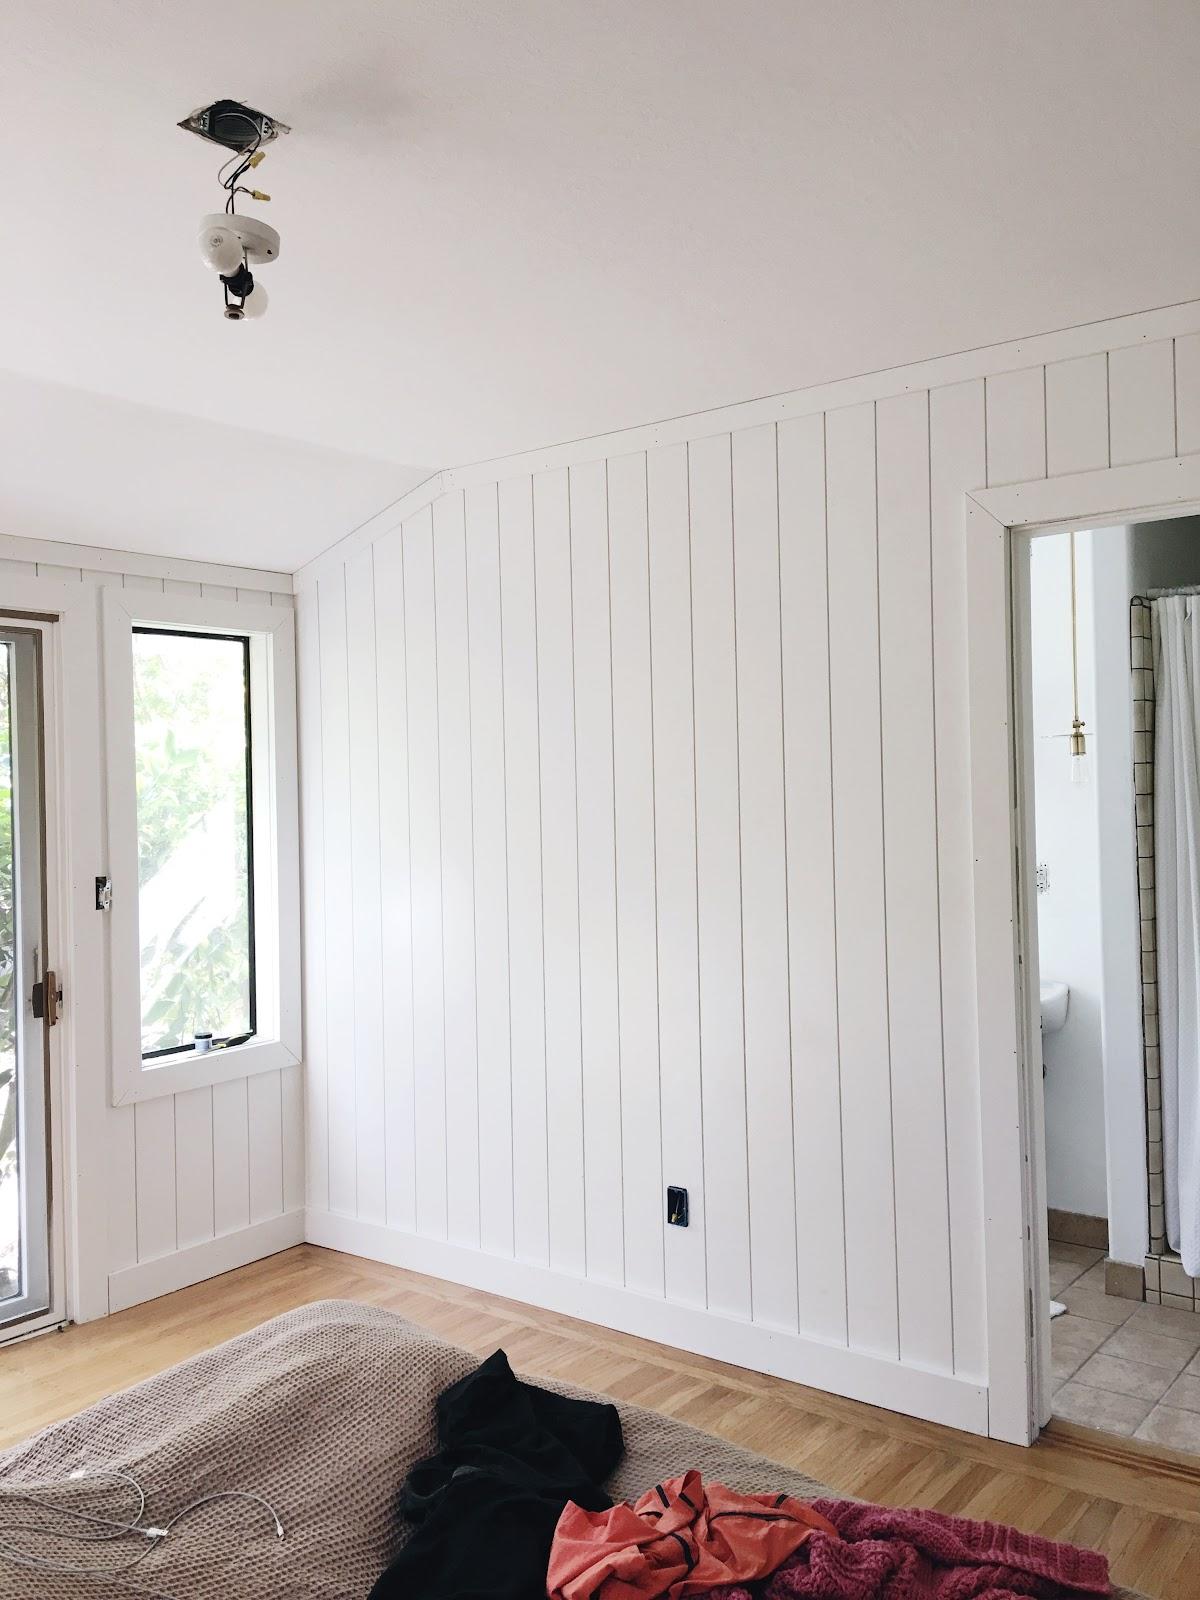 Is Shiplap Out of Style or It's a Recurring Trend? The Finished Space